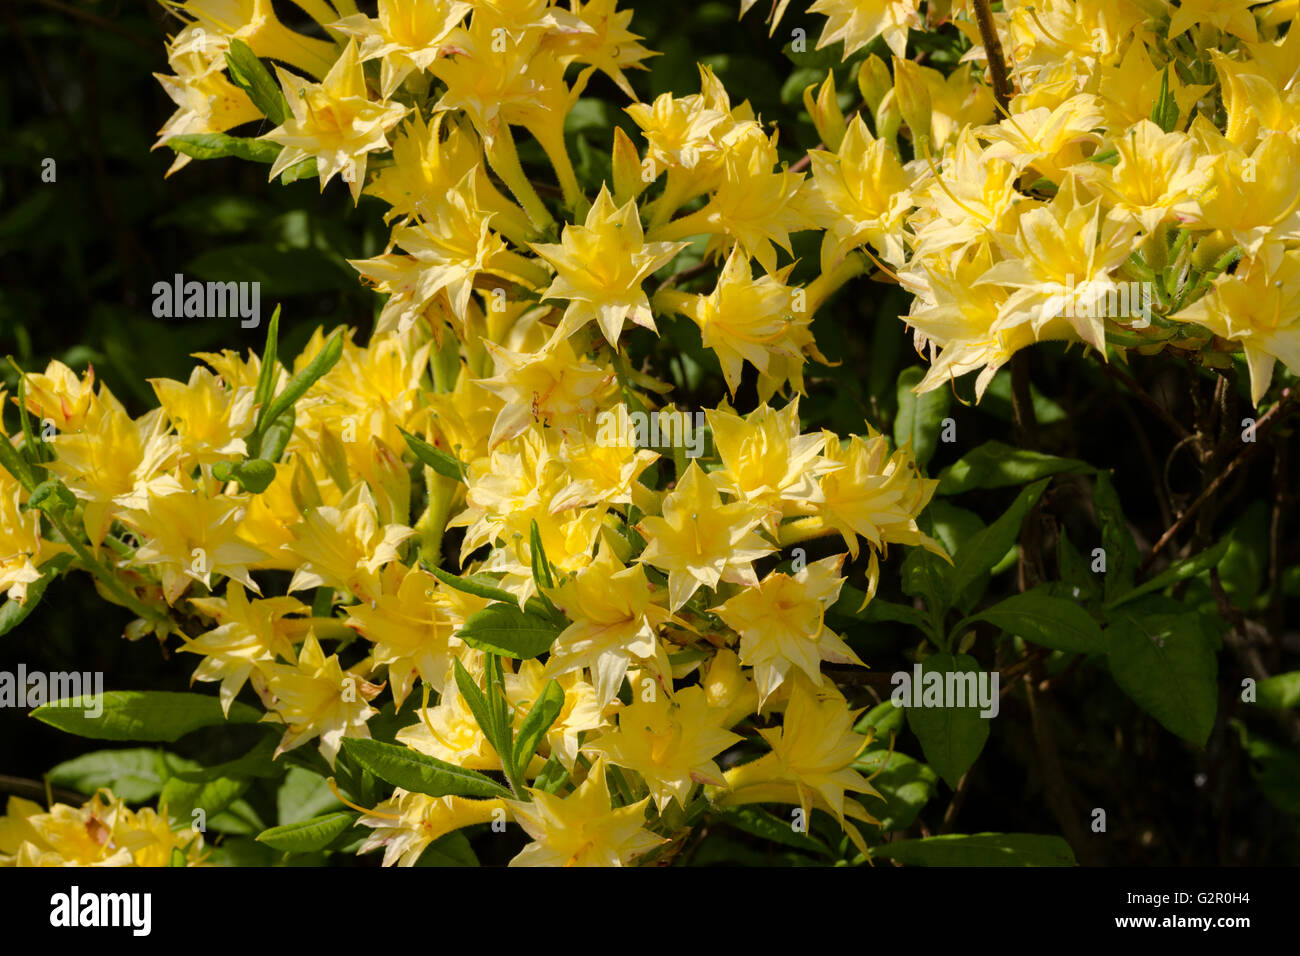 Scented, small double flowers of the Ghent Rustica hybrid Azalea, Rhododendron 'Narcissiflorum' Stock Photo